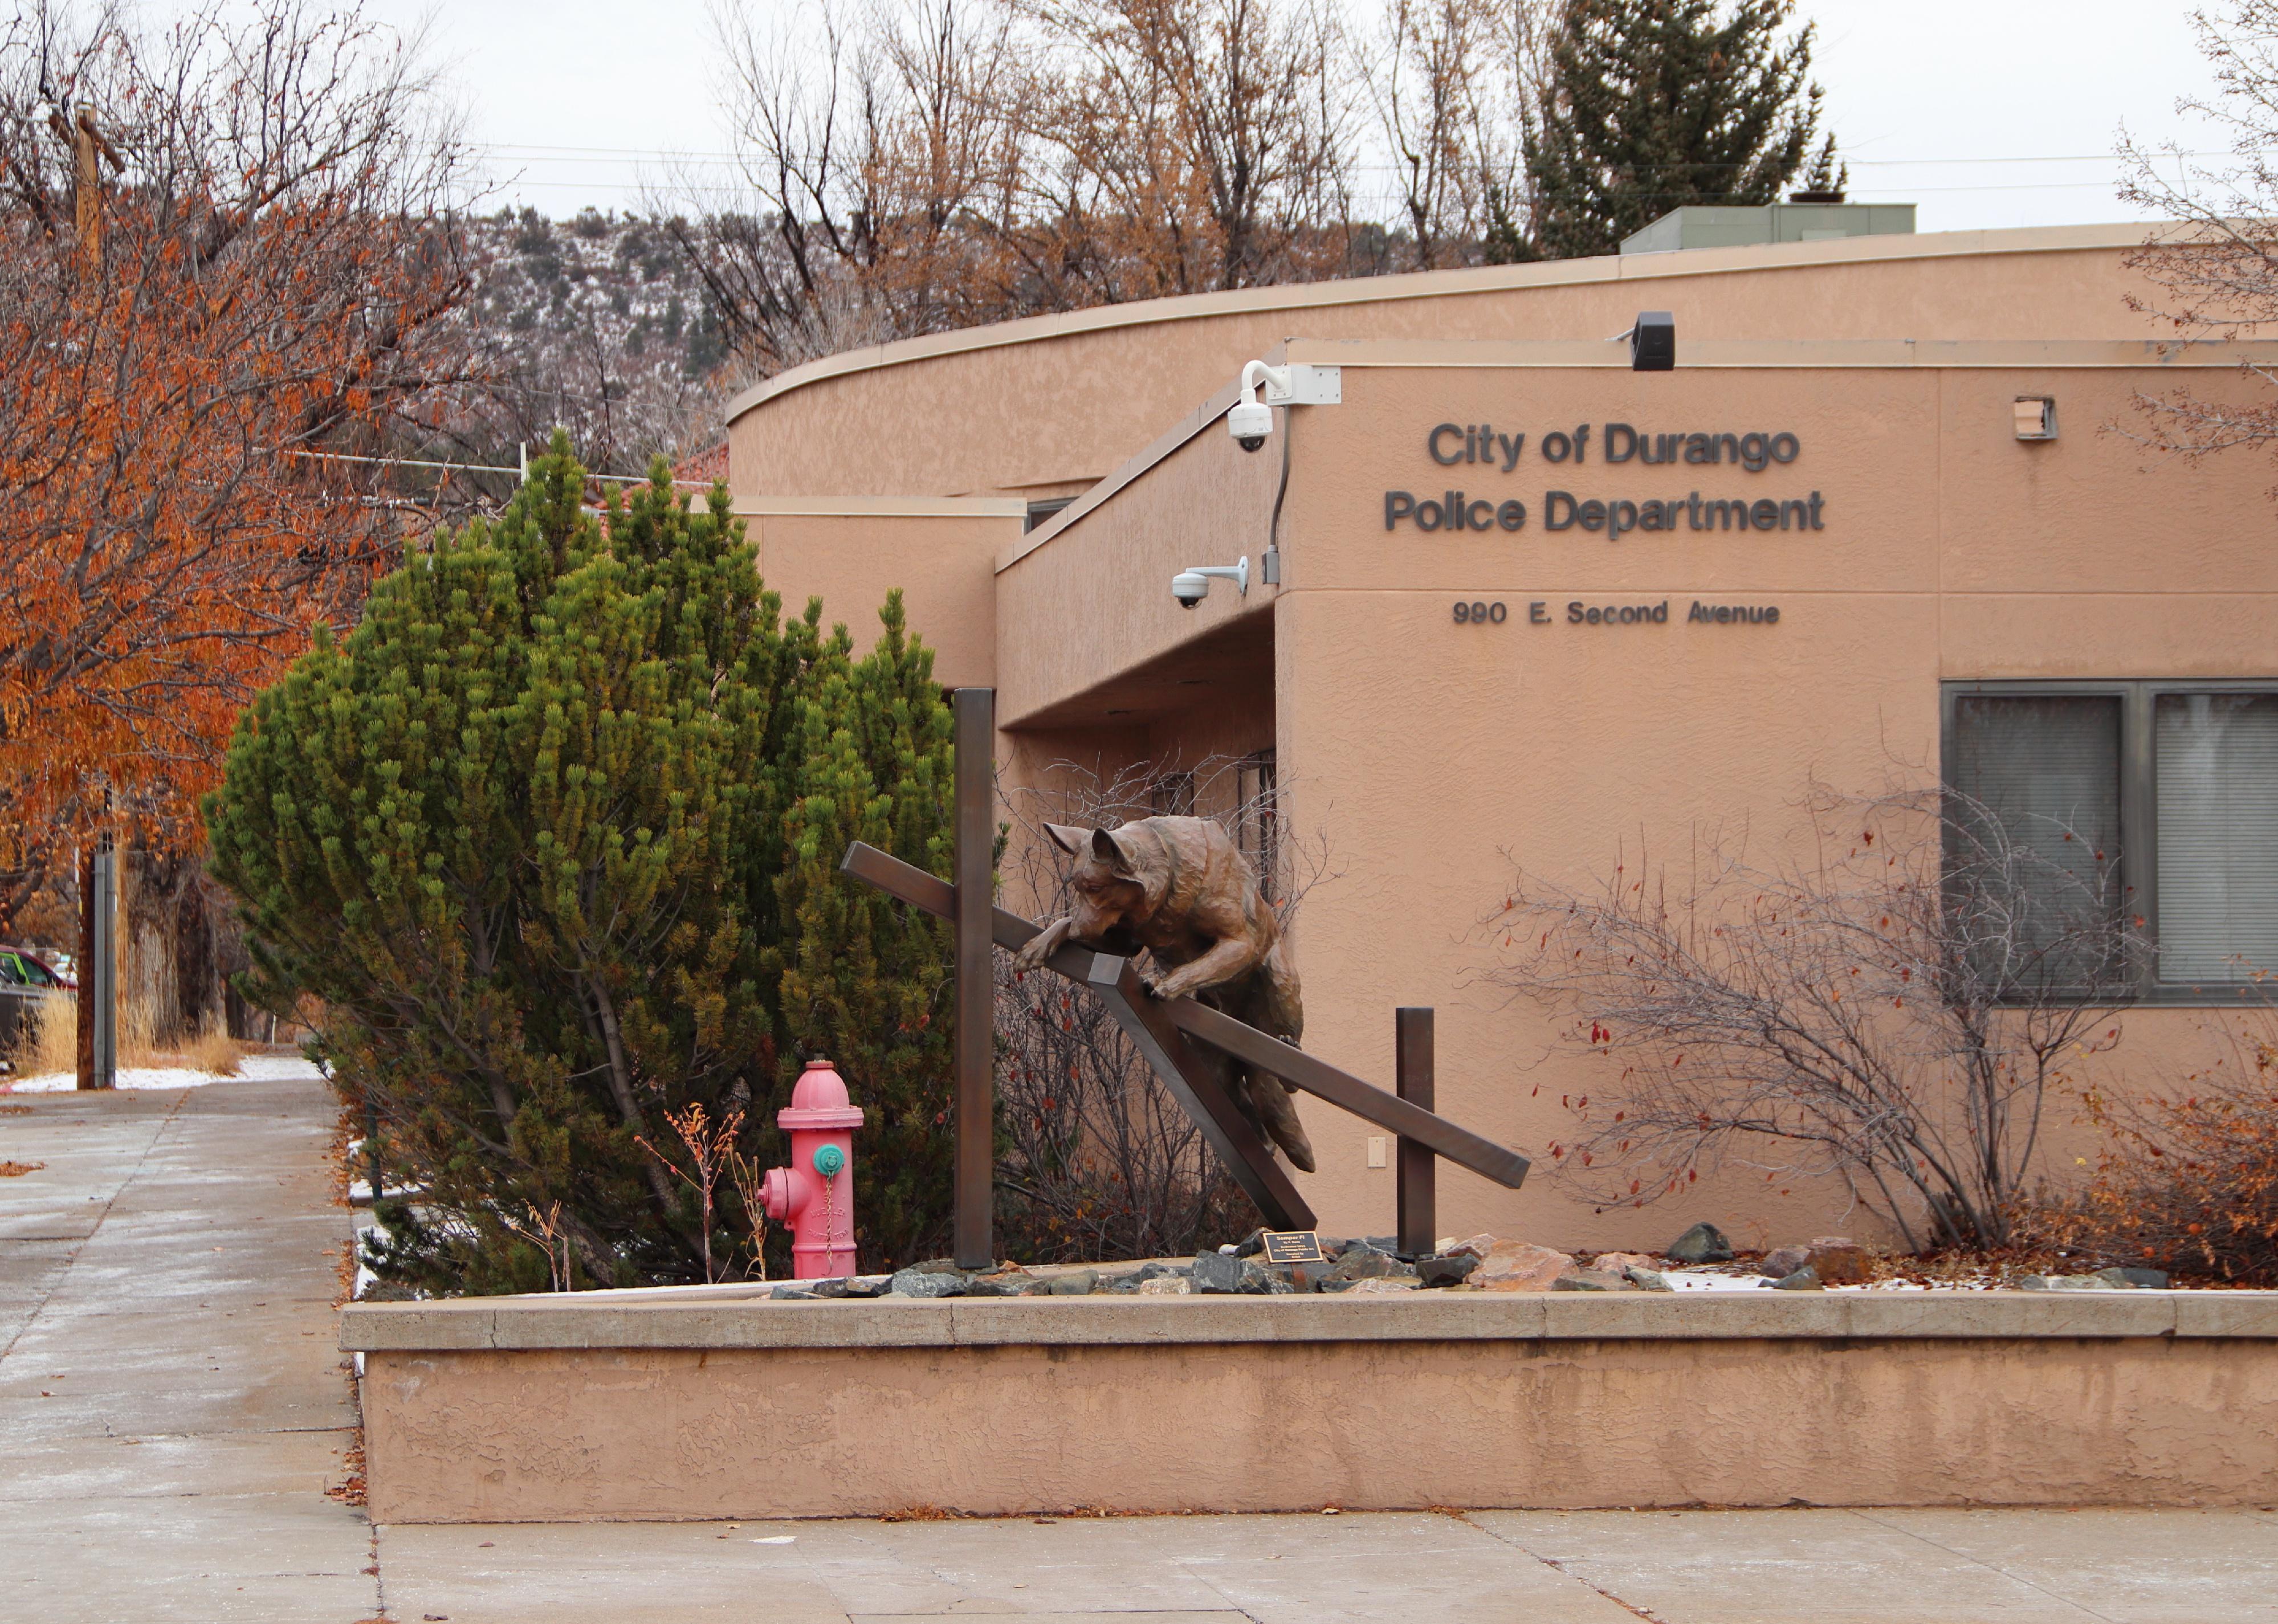 Police Department of the City of Durango.